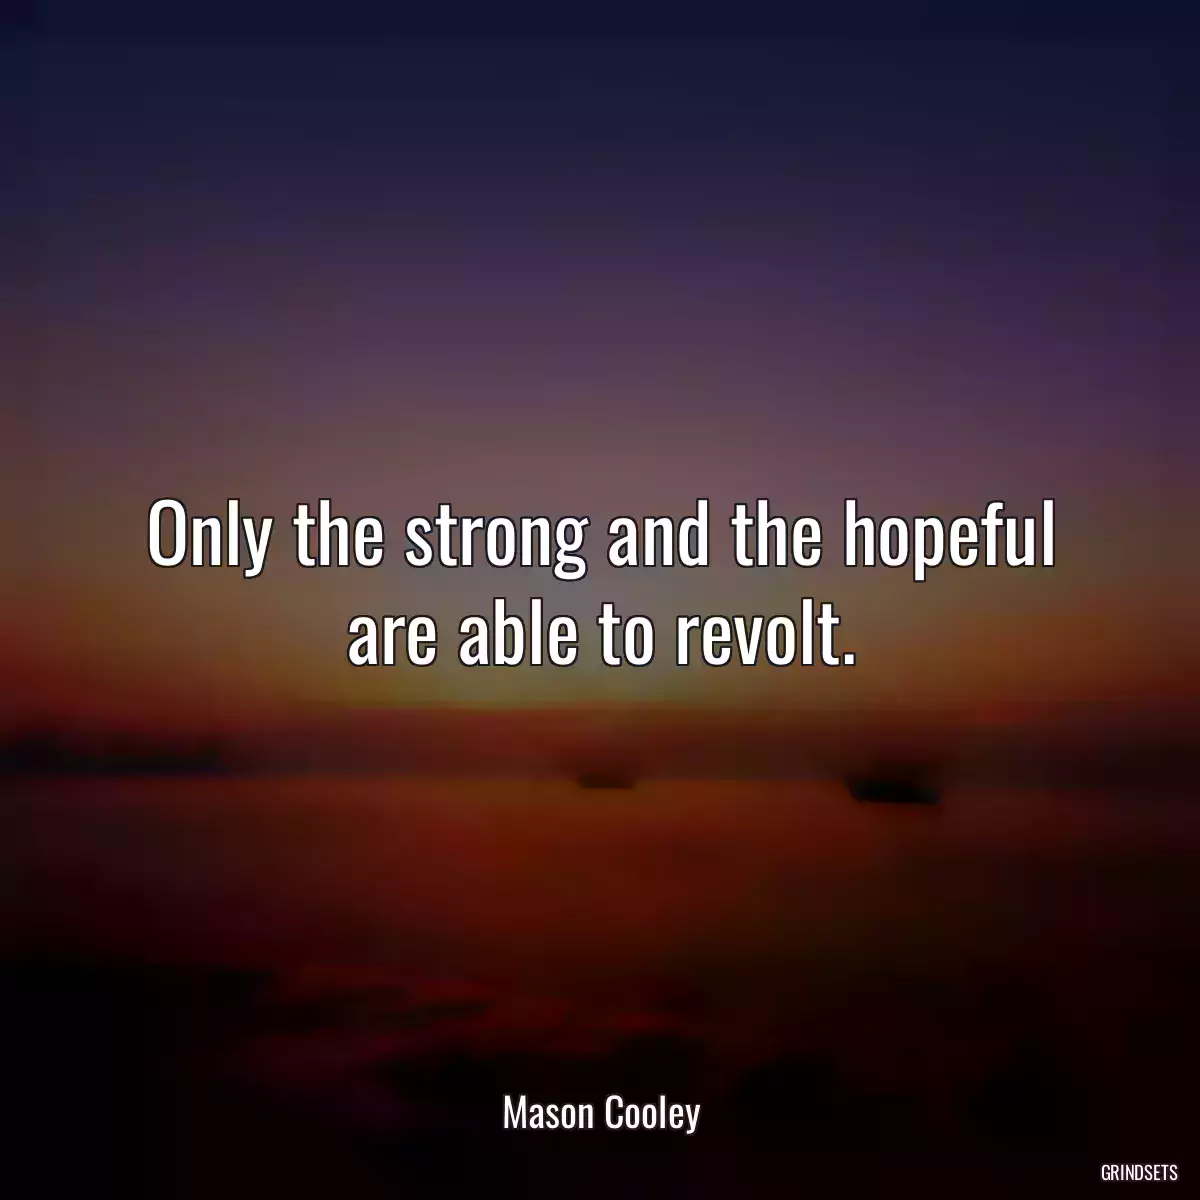 Only the strong and the hopeful are able to revolt.